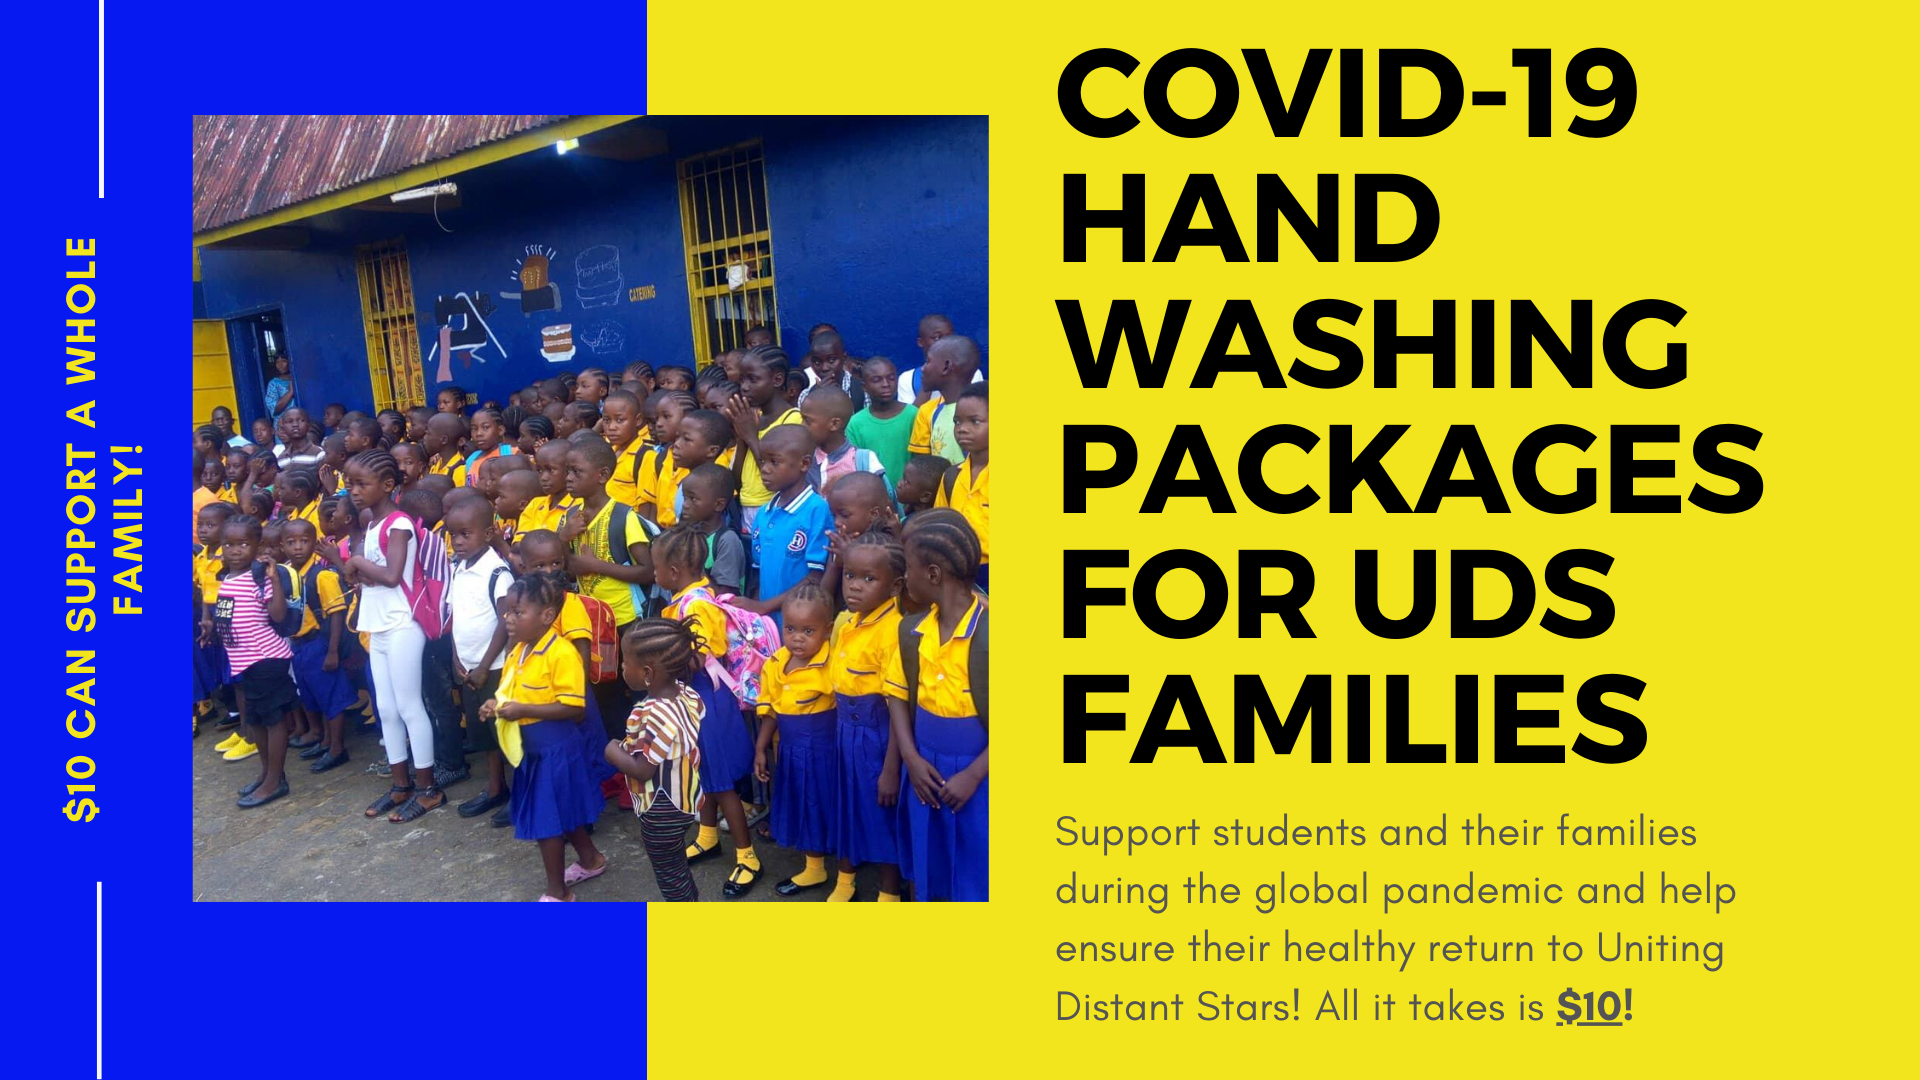 COVID-19 Handwashing Package for UDS Families